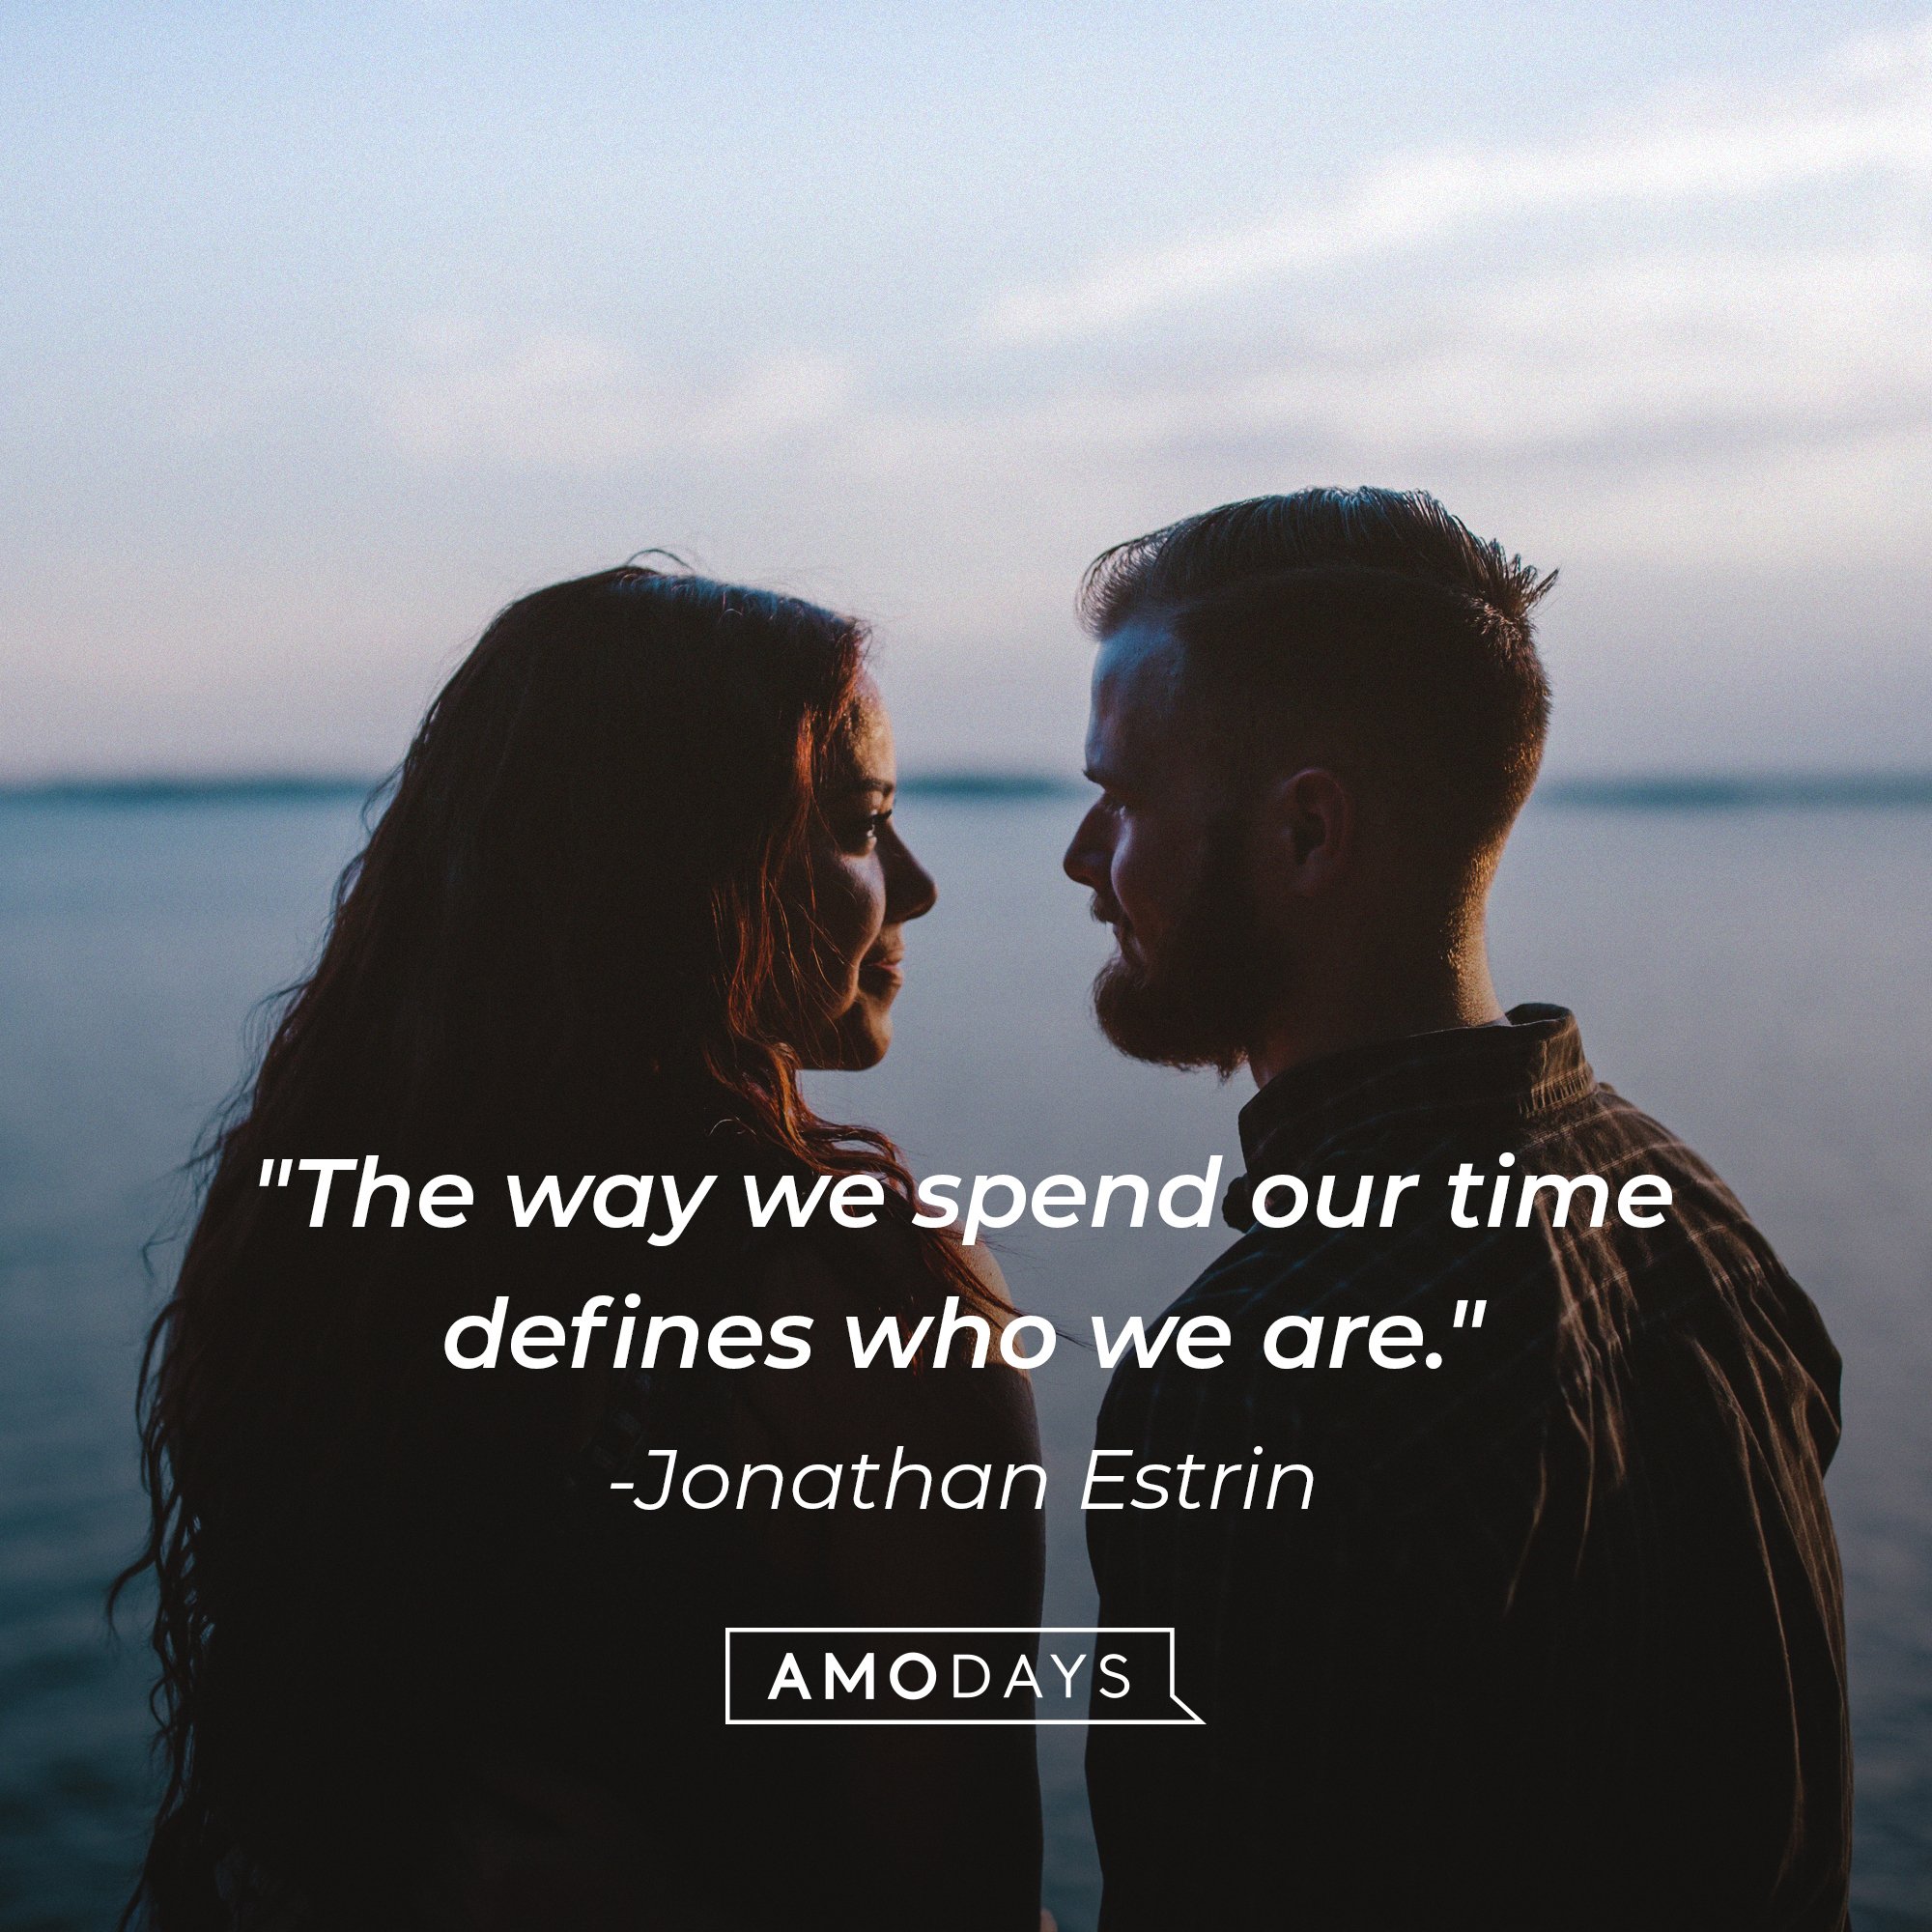 Jonathan Estrin’s quote: "The way we spend our time defines who we are."  | Image: AmoDays